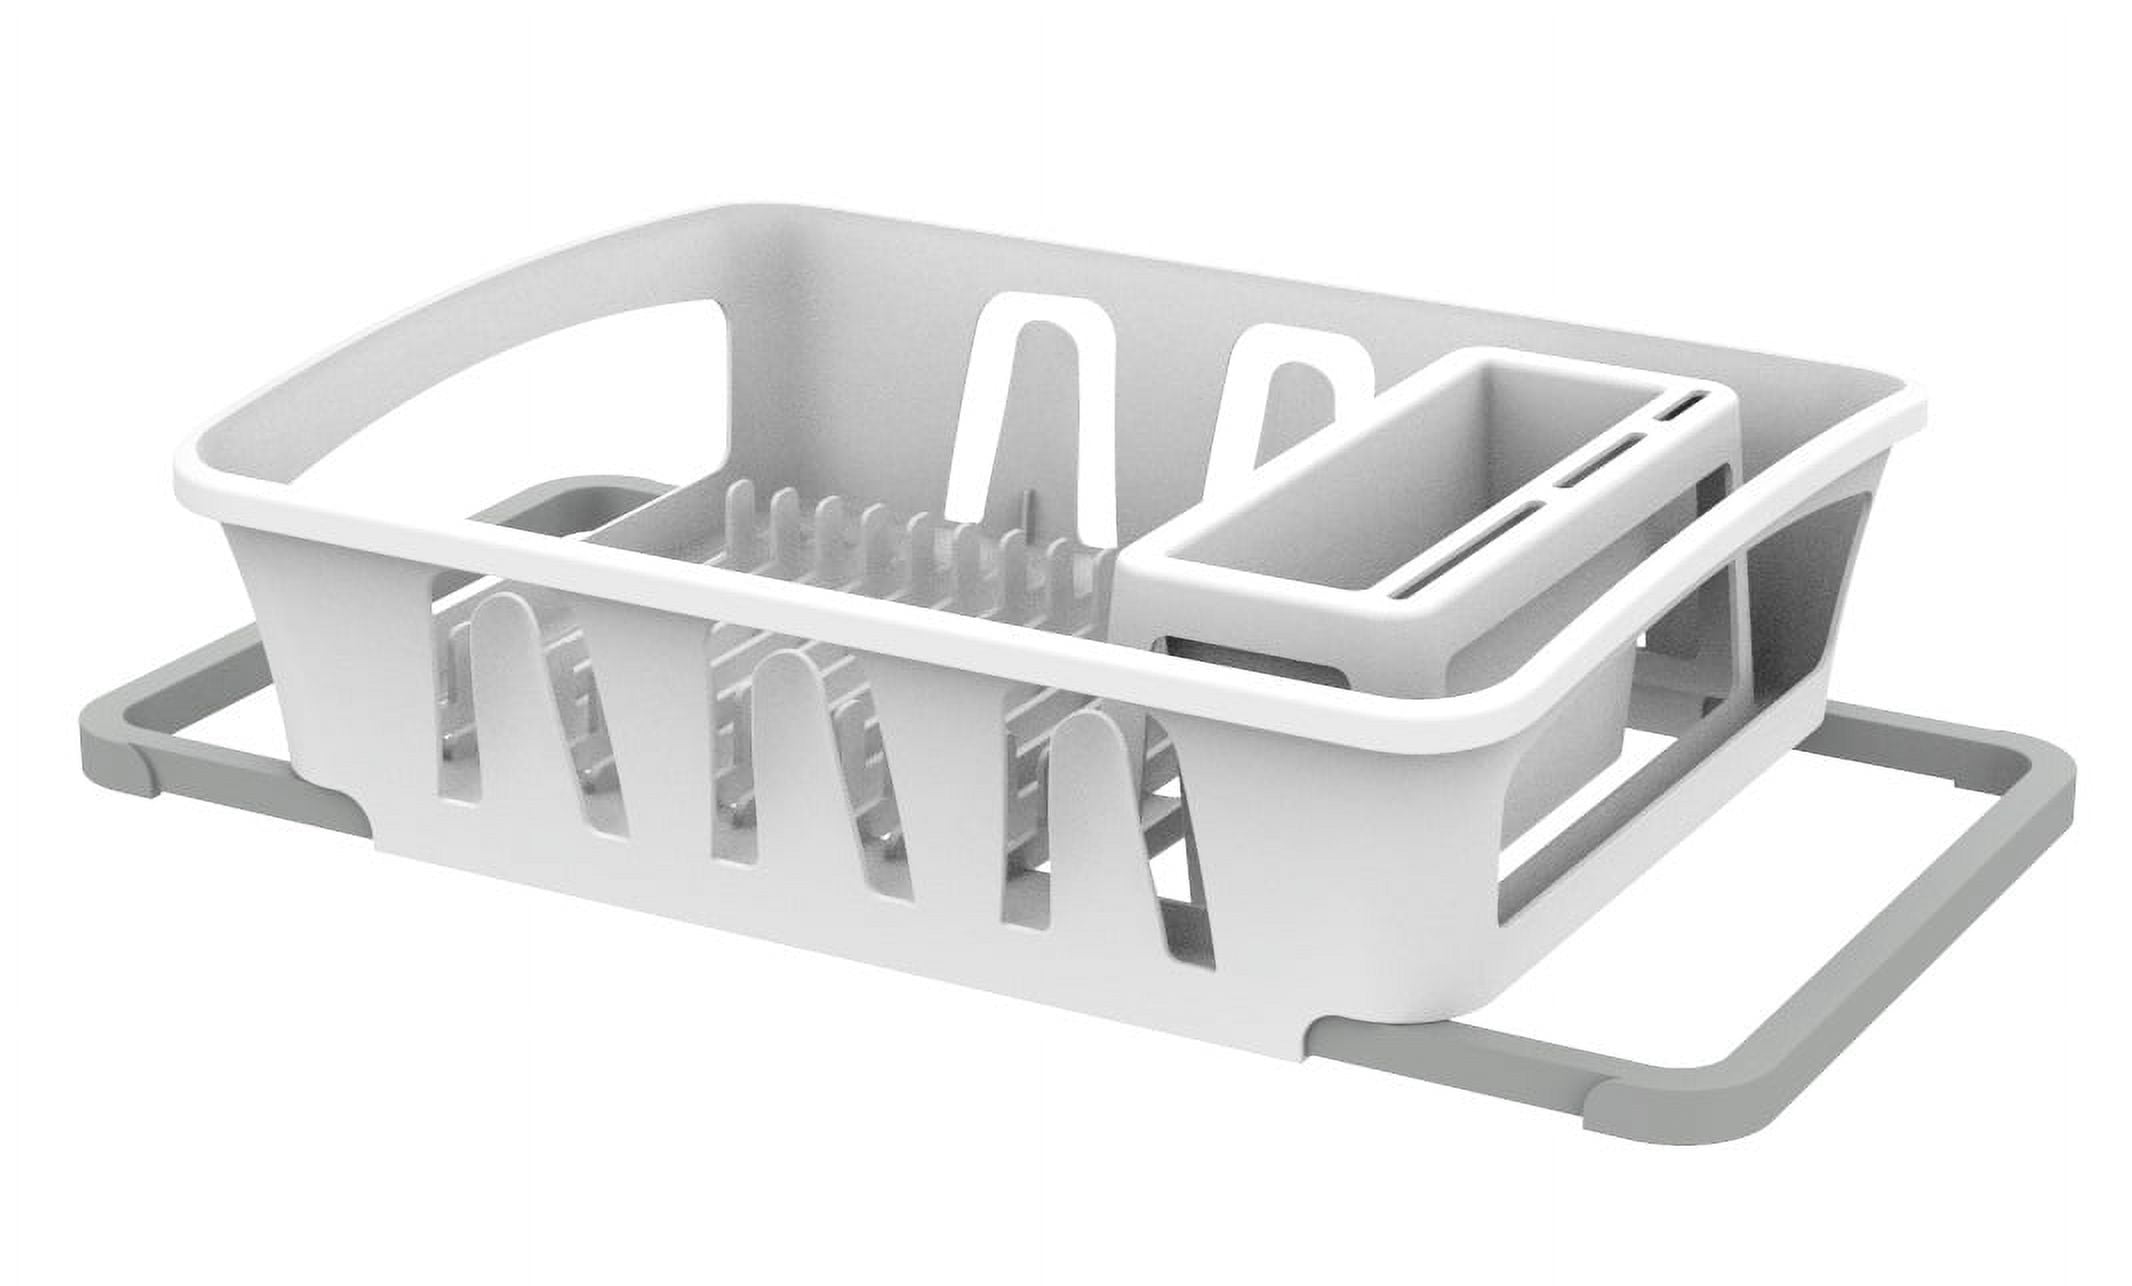 YKLSLH Expandable Dish Drying Rack, 2 Tier Large Drying Rack for Kitchen  Counter with Drainboard, Glass Holder, Utensil Holder-Dish Drainers (White)